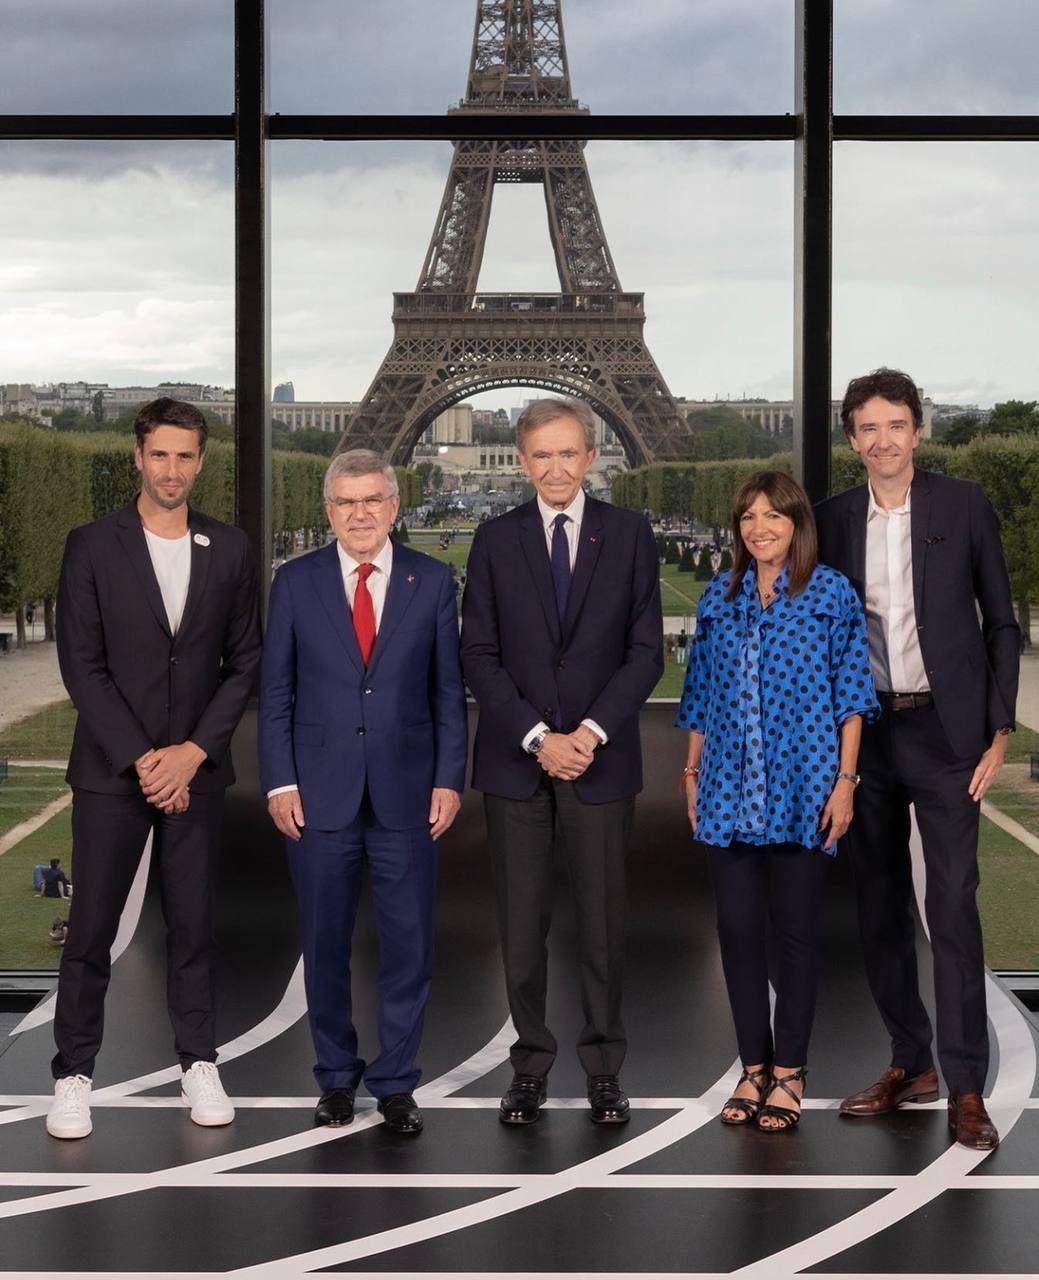 LVMH becomes the main sponsor of the Olympic Games